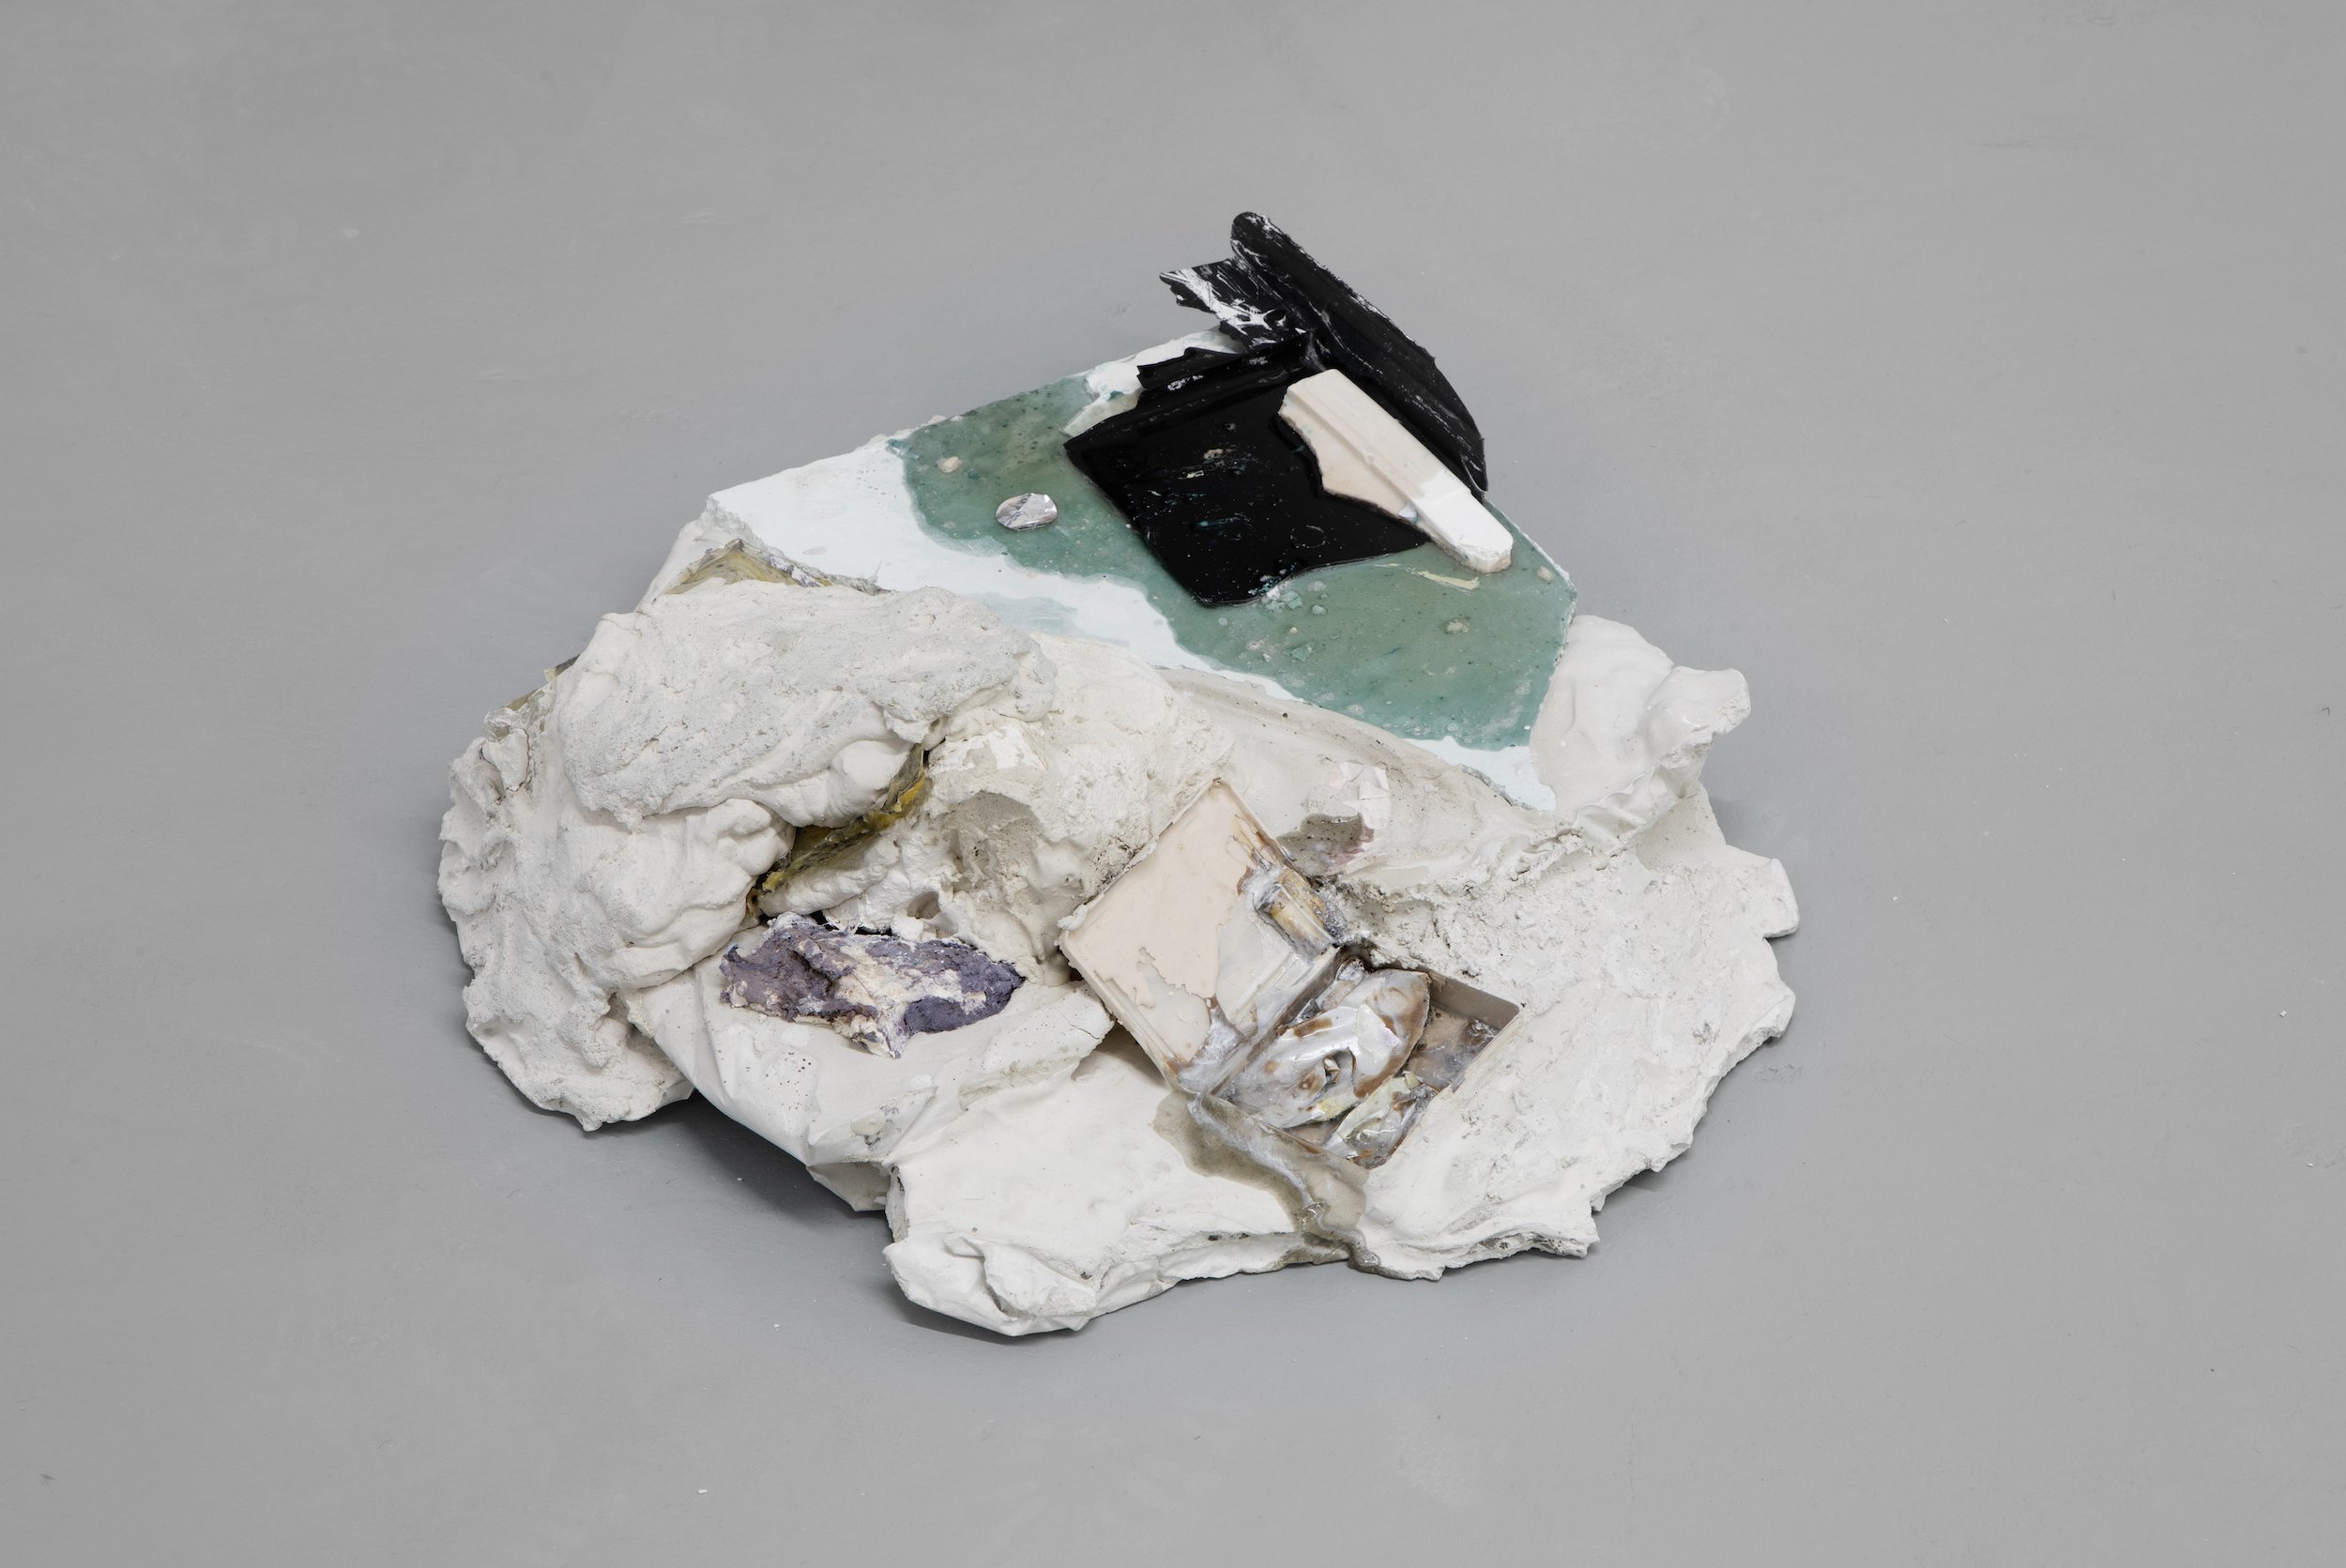  Laur P,  Those who made it through ages and those who couldn’t , 2024, Fragments of plaster casts, epoxy resin, paper pulp, dry pigments, piece of plastic tray, solder metal, plaster, concrete sand, aluminum foil seal cap, plastic container, cigaret